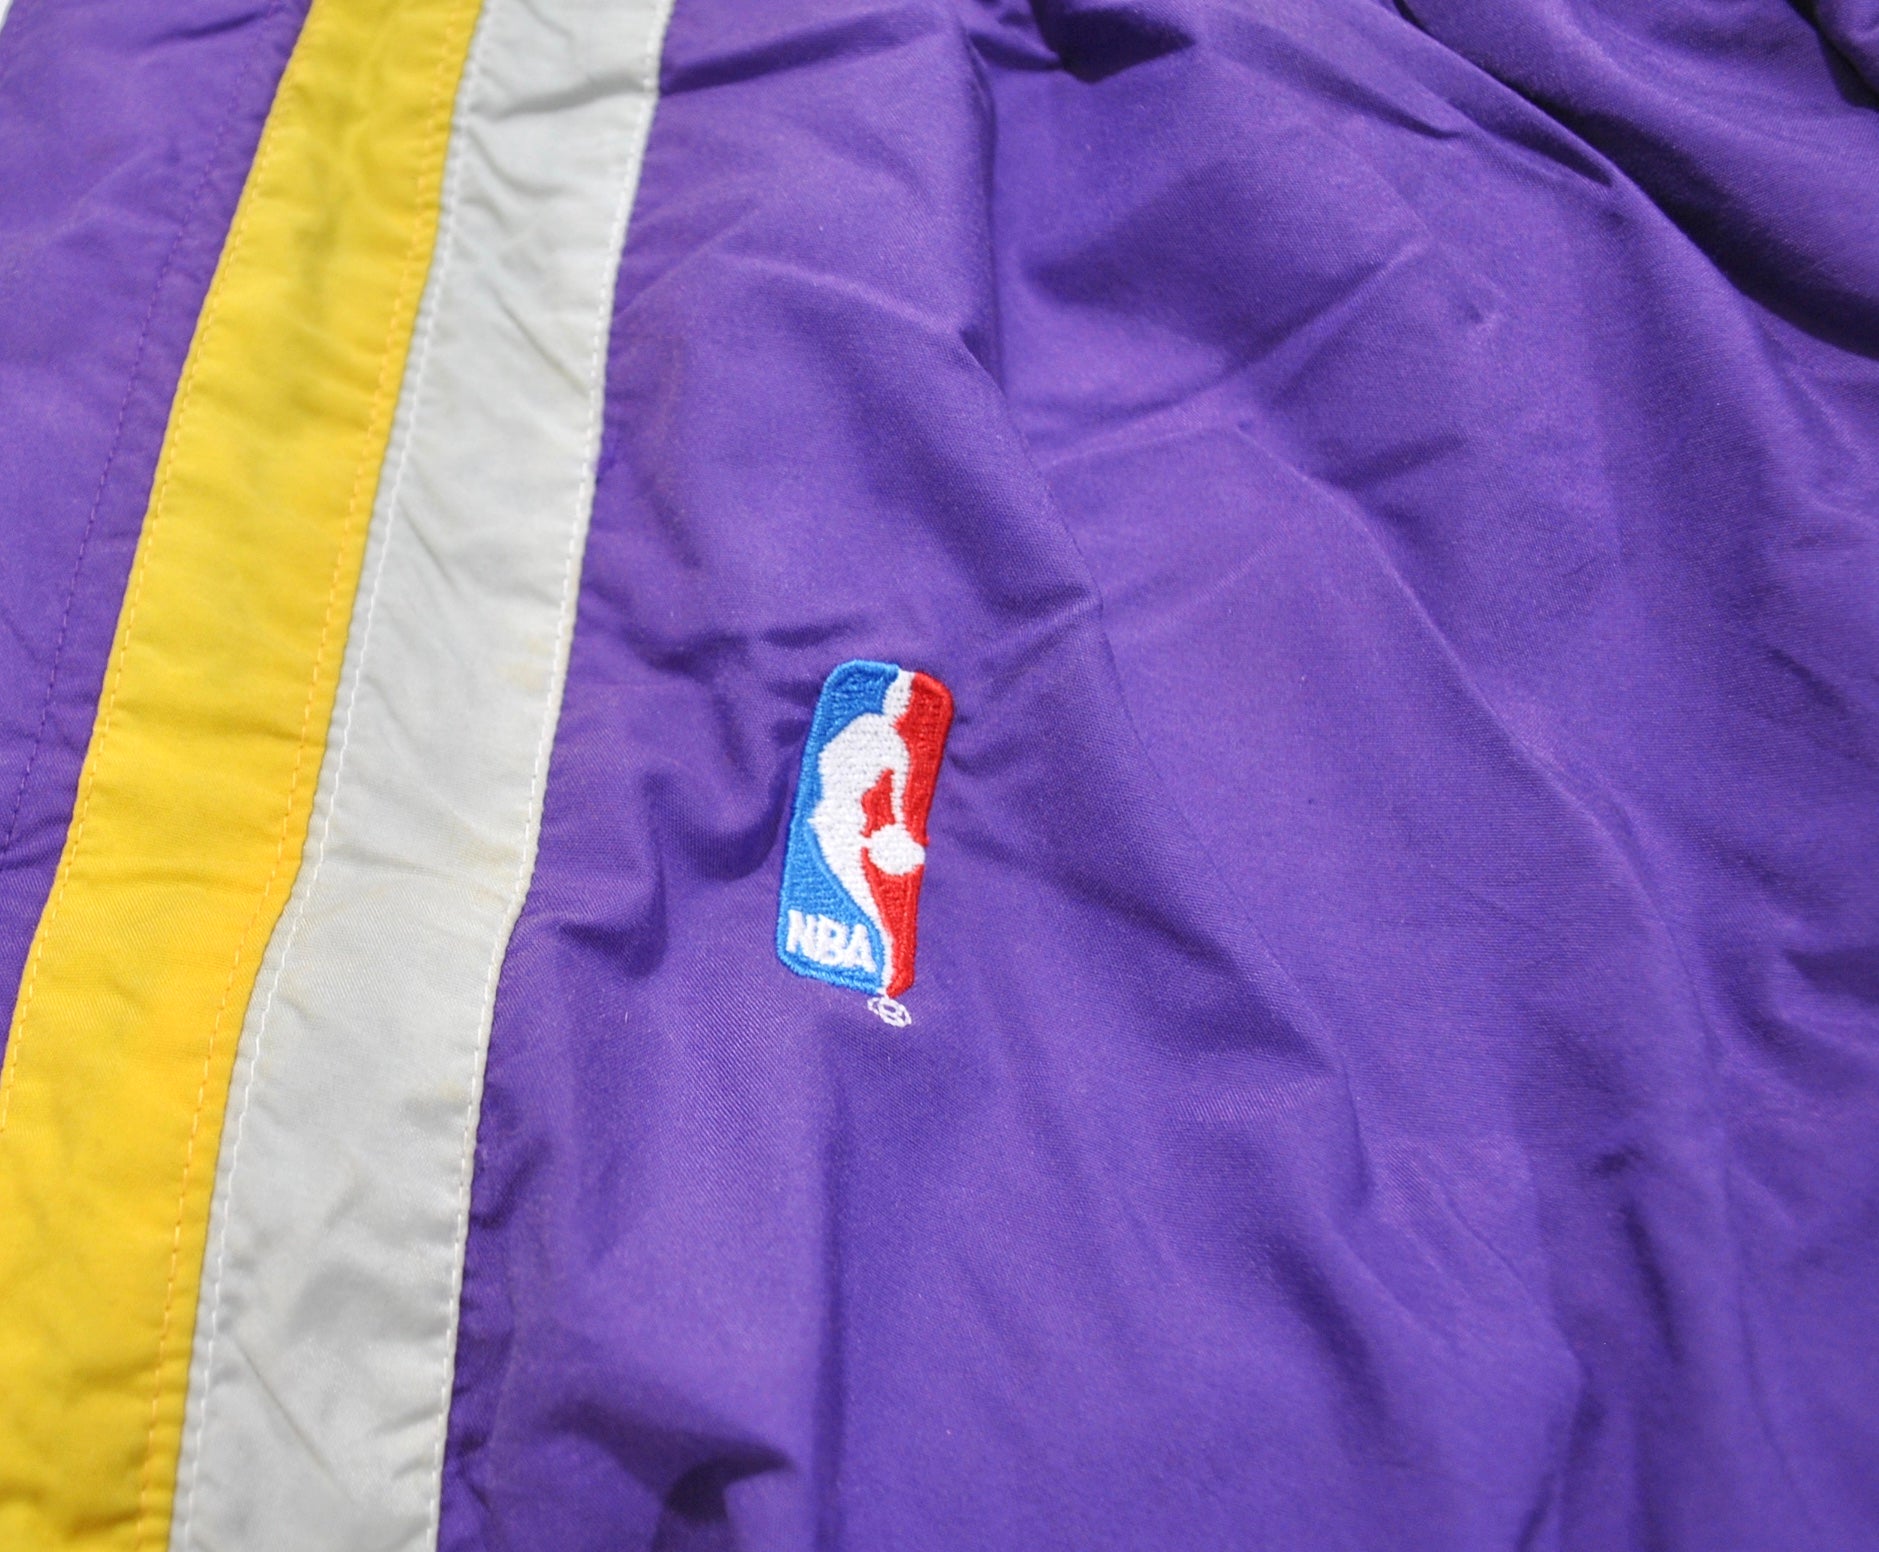 Vintage Los Angeles Lakers Champion Brand Jacket & Pants Size X-Large –  Yesterday's Attic